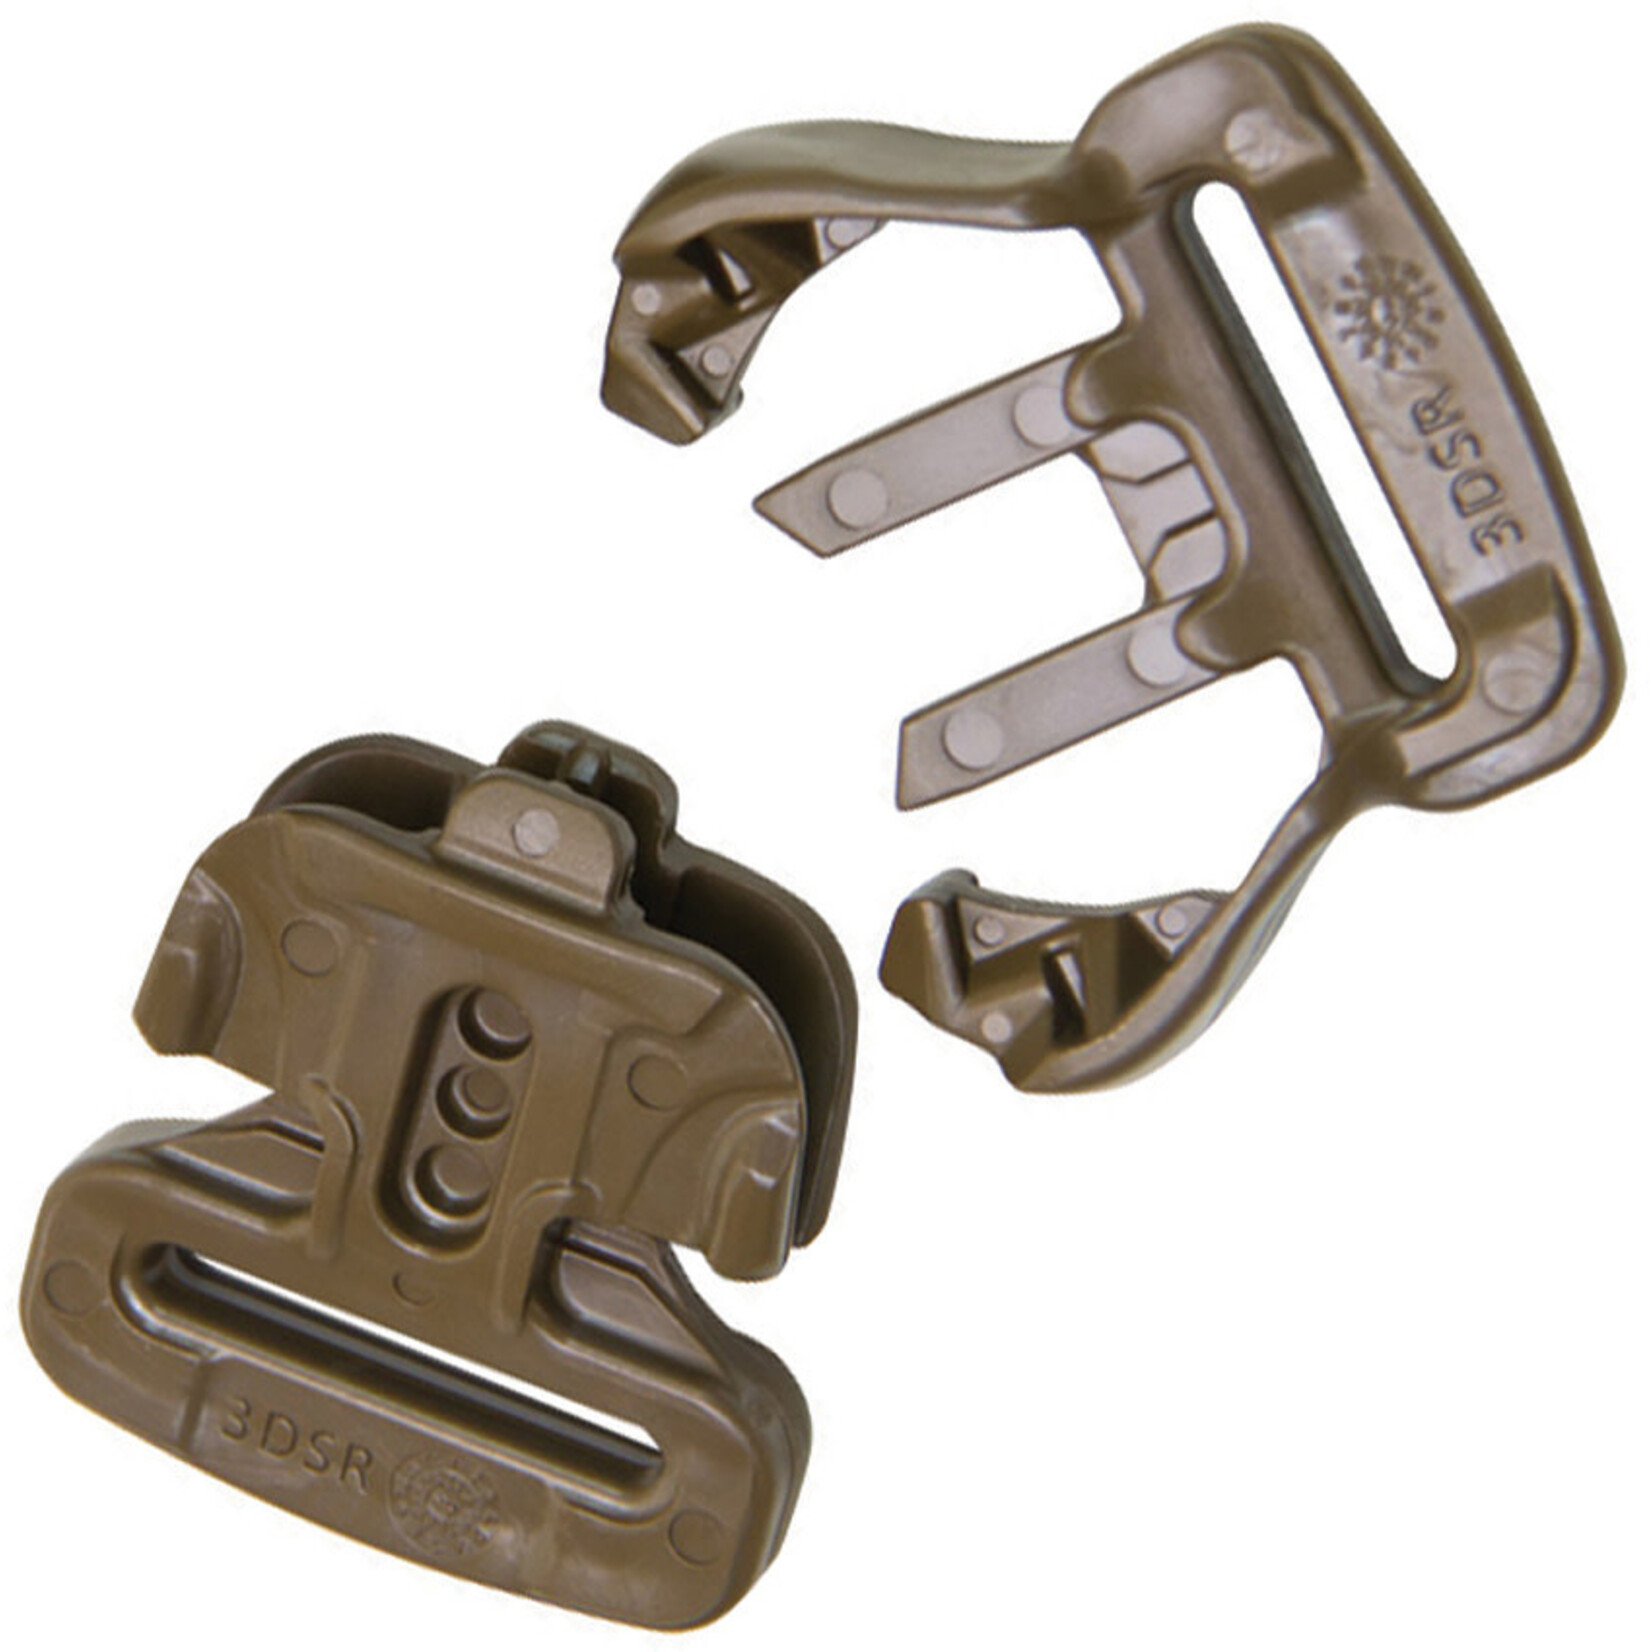 ITW 3DSR Tactical Buckle 1"